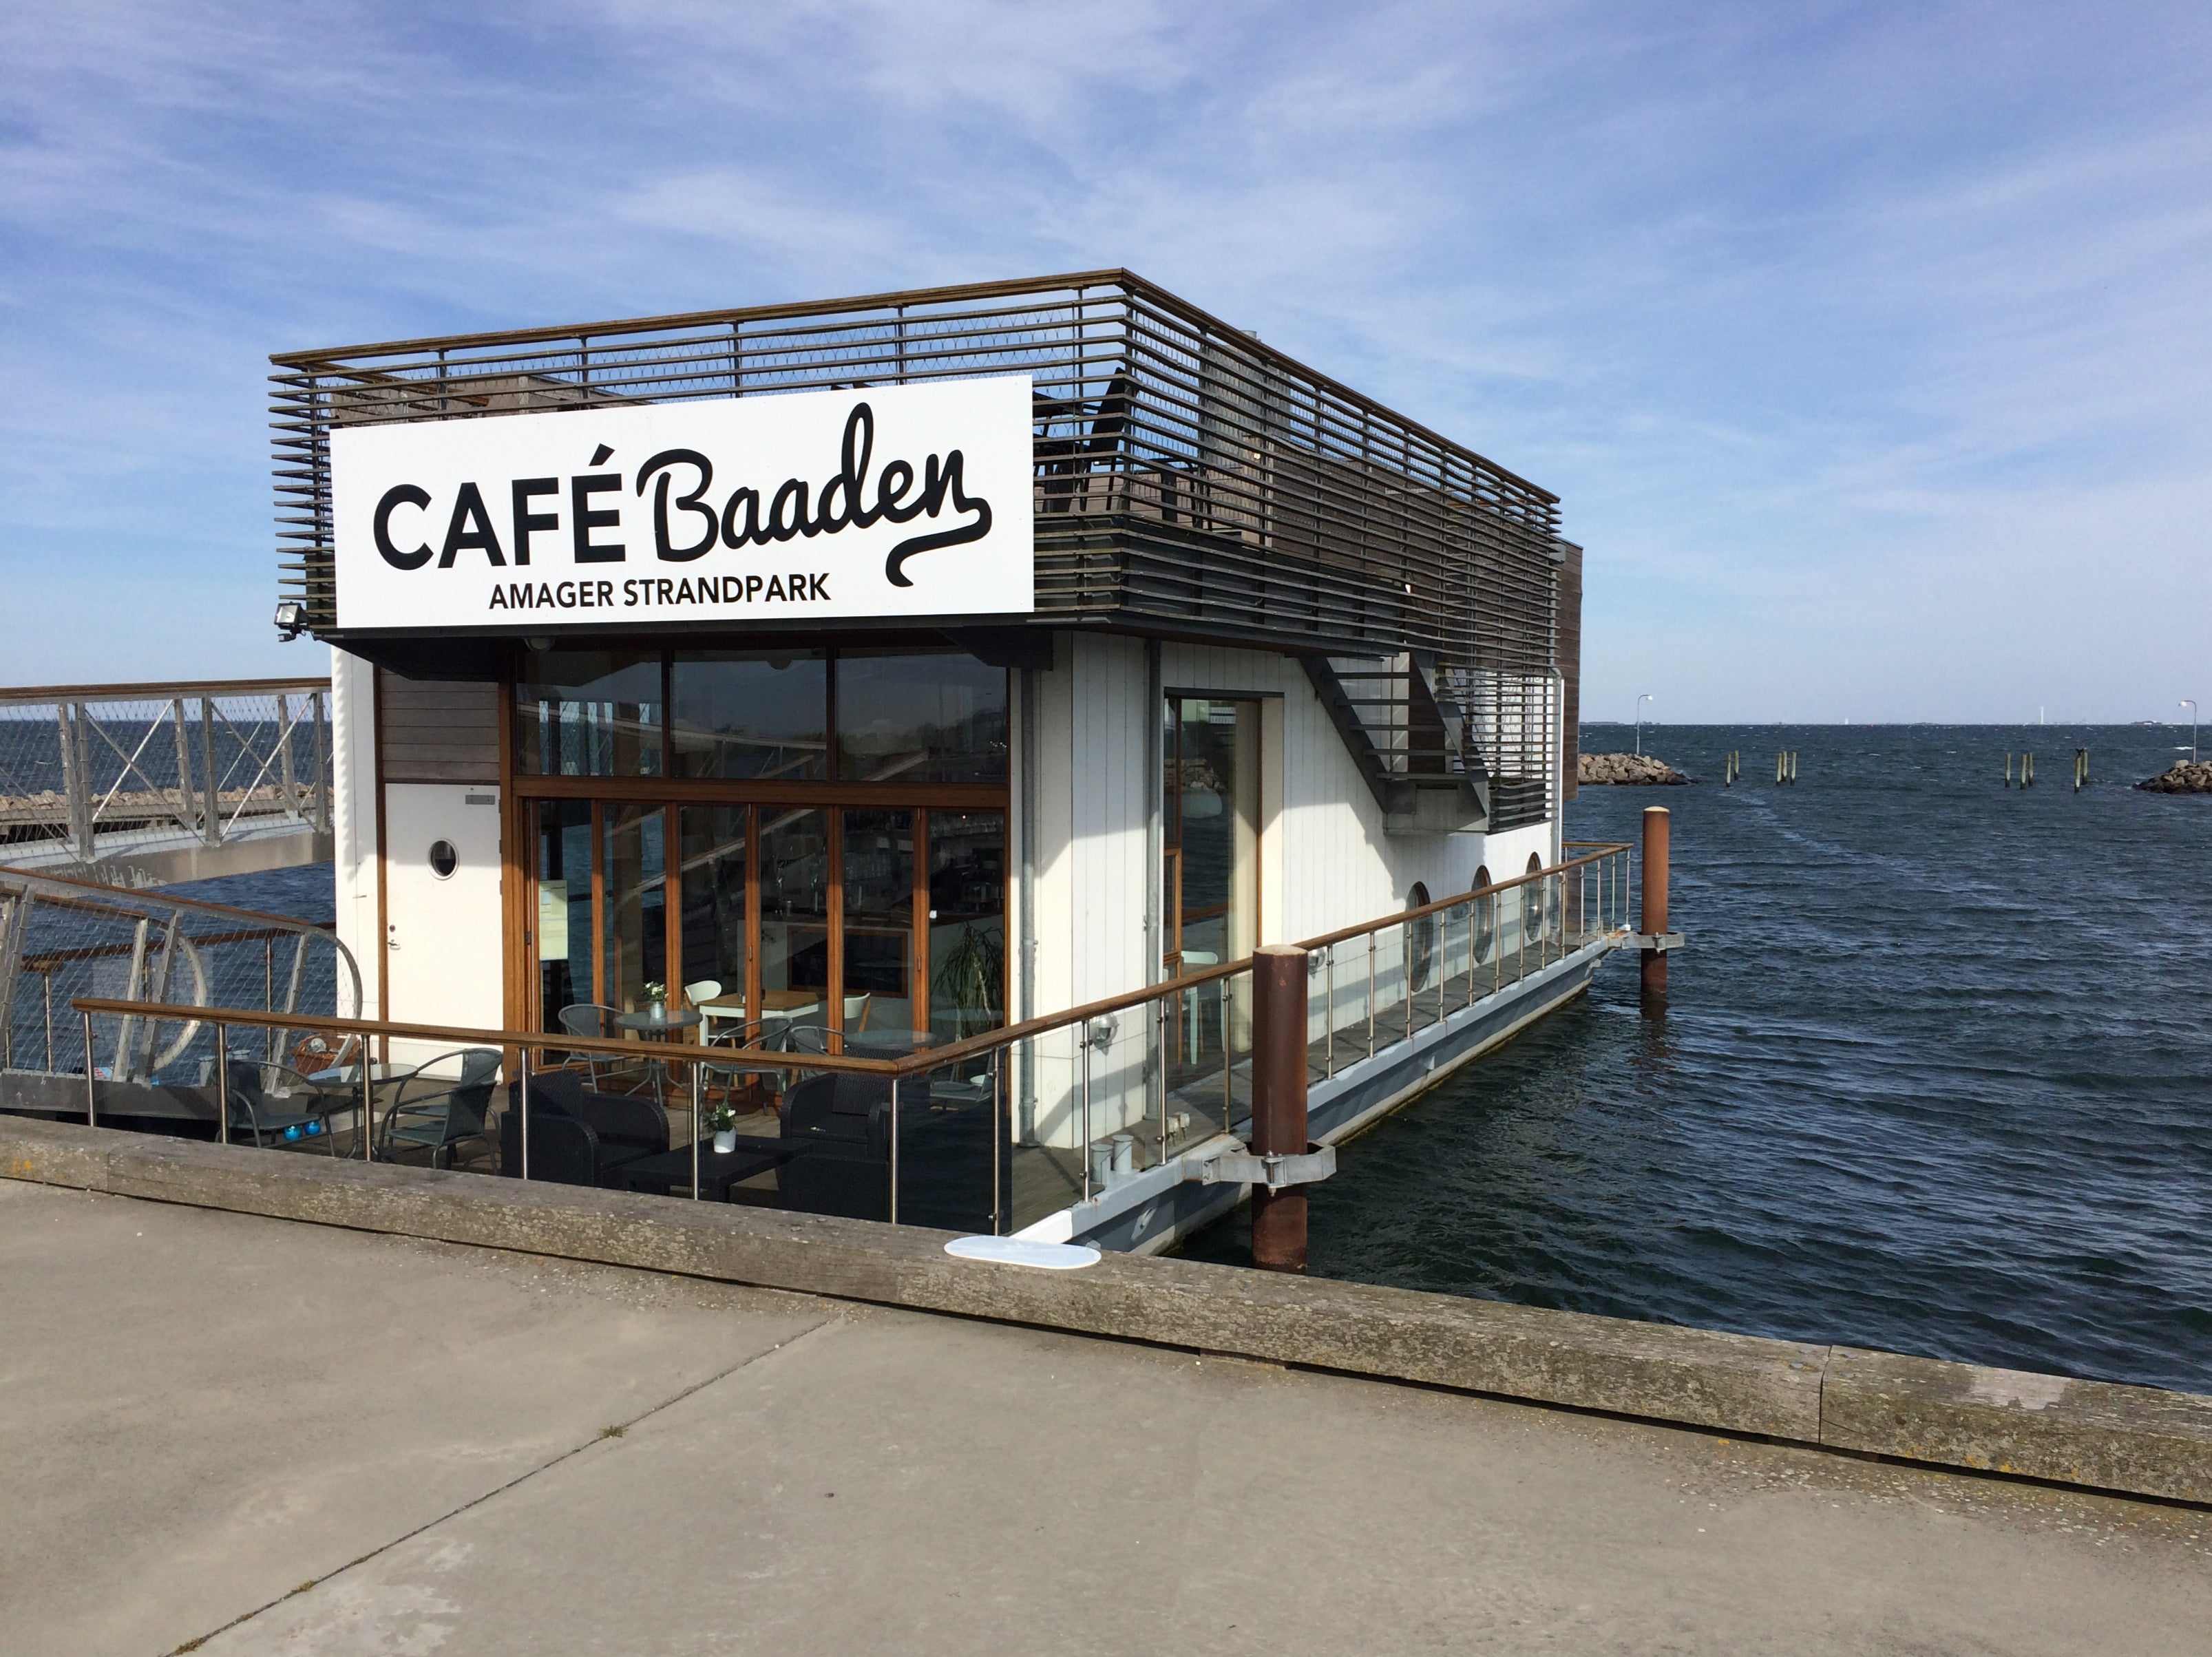 Floating eatery Cafe Baaden